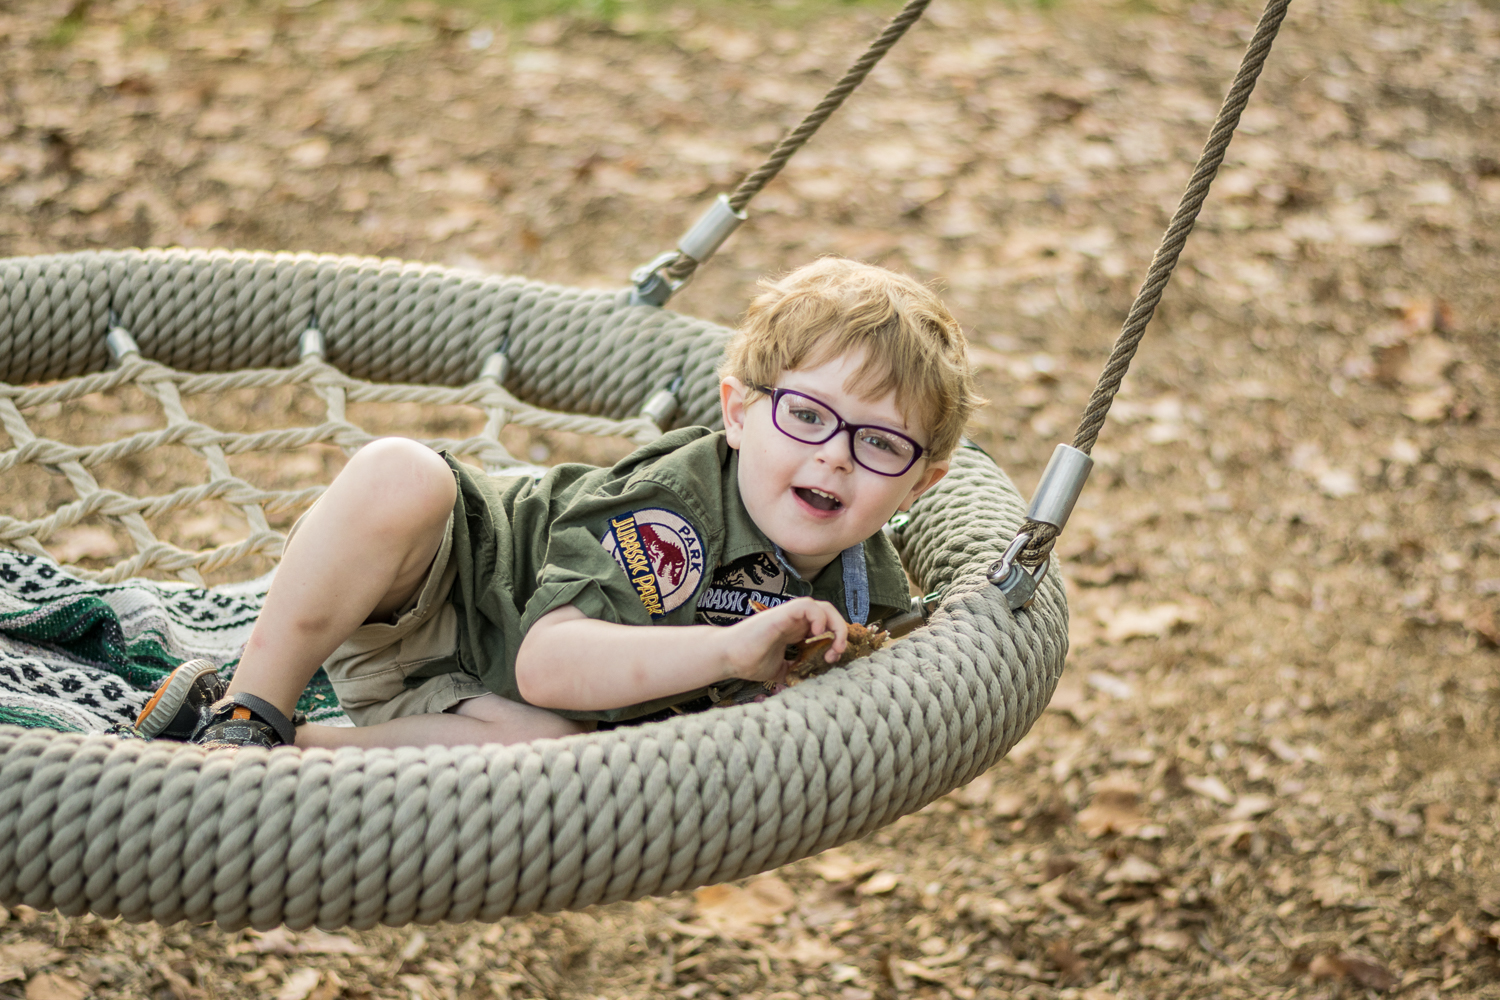 A young boy playing with his dinosaur in a large rope swing.